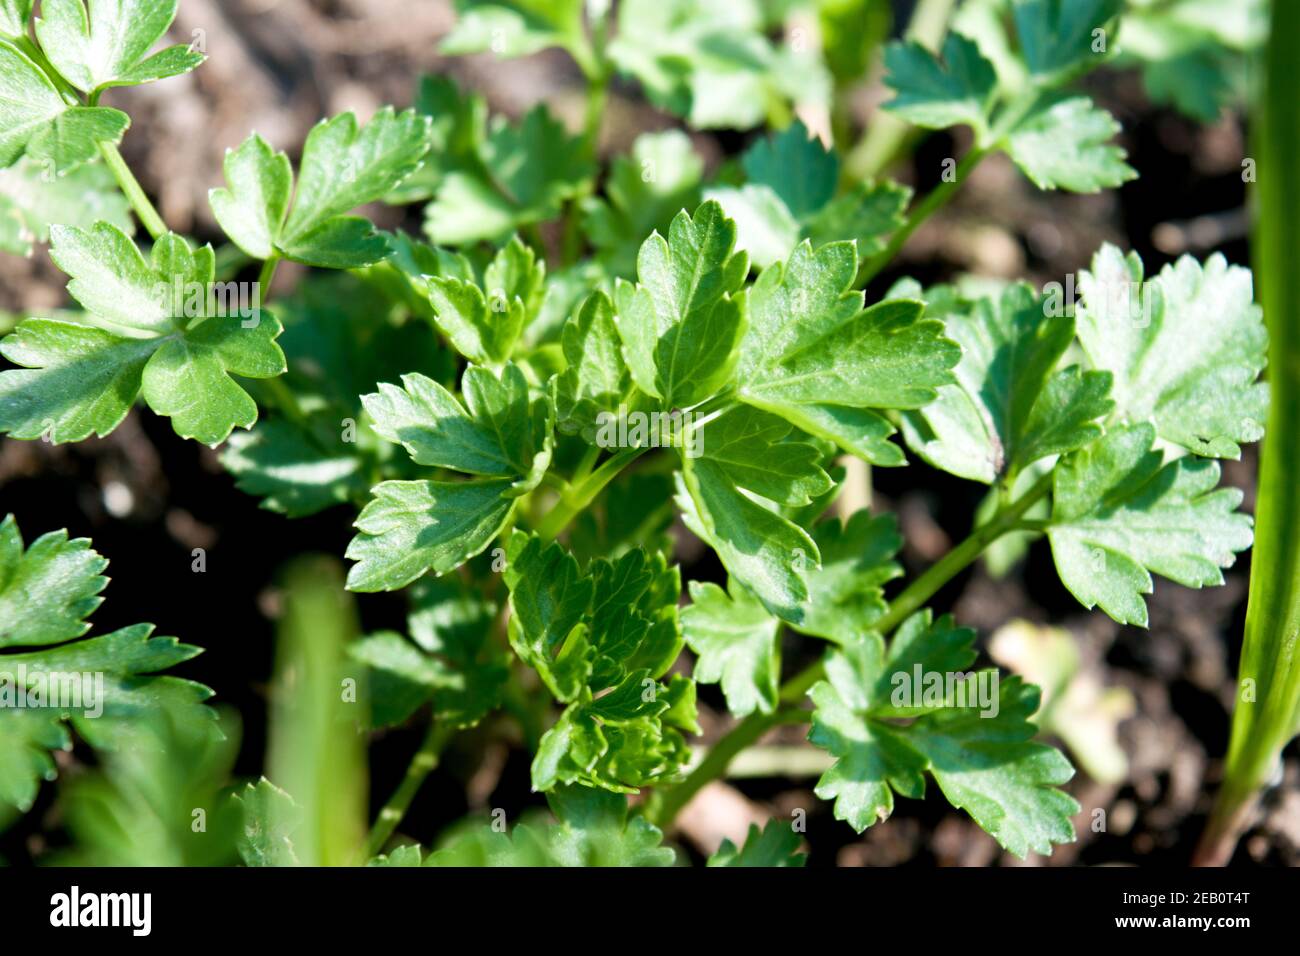 Young parsley bush growing in the garden. Parsley is a biennial plant with aromatic leaves that are either crinkly or flat and used as a culinary herb. Stock Photo